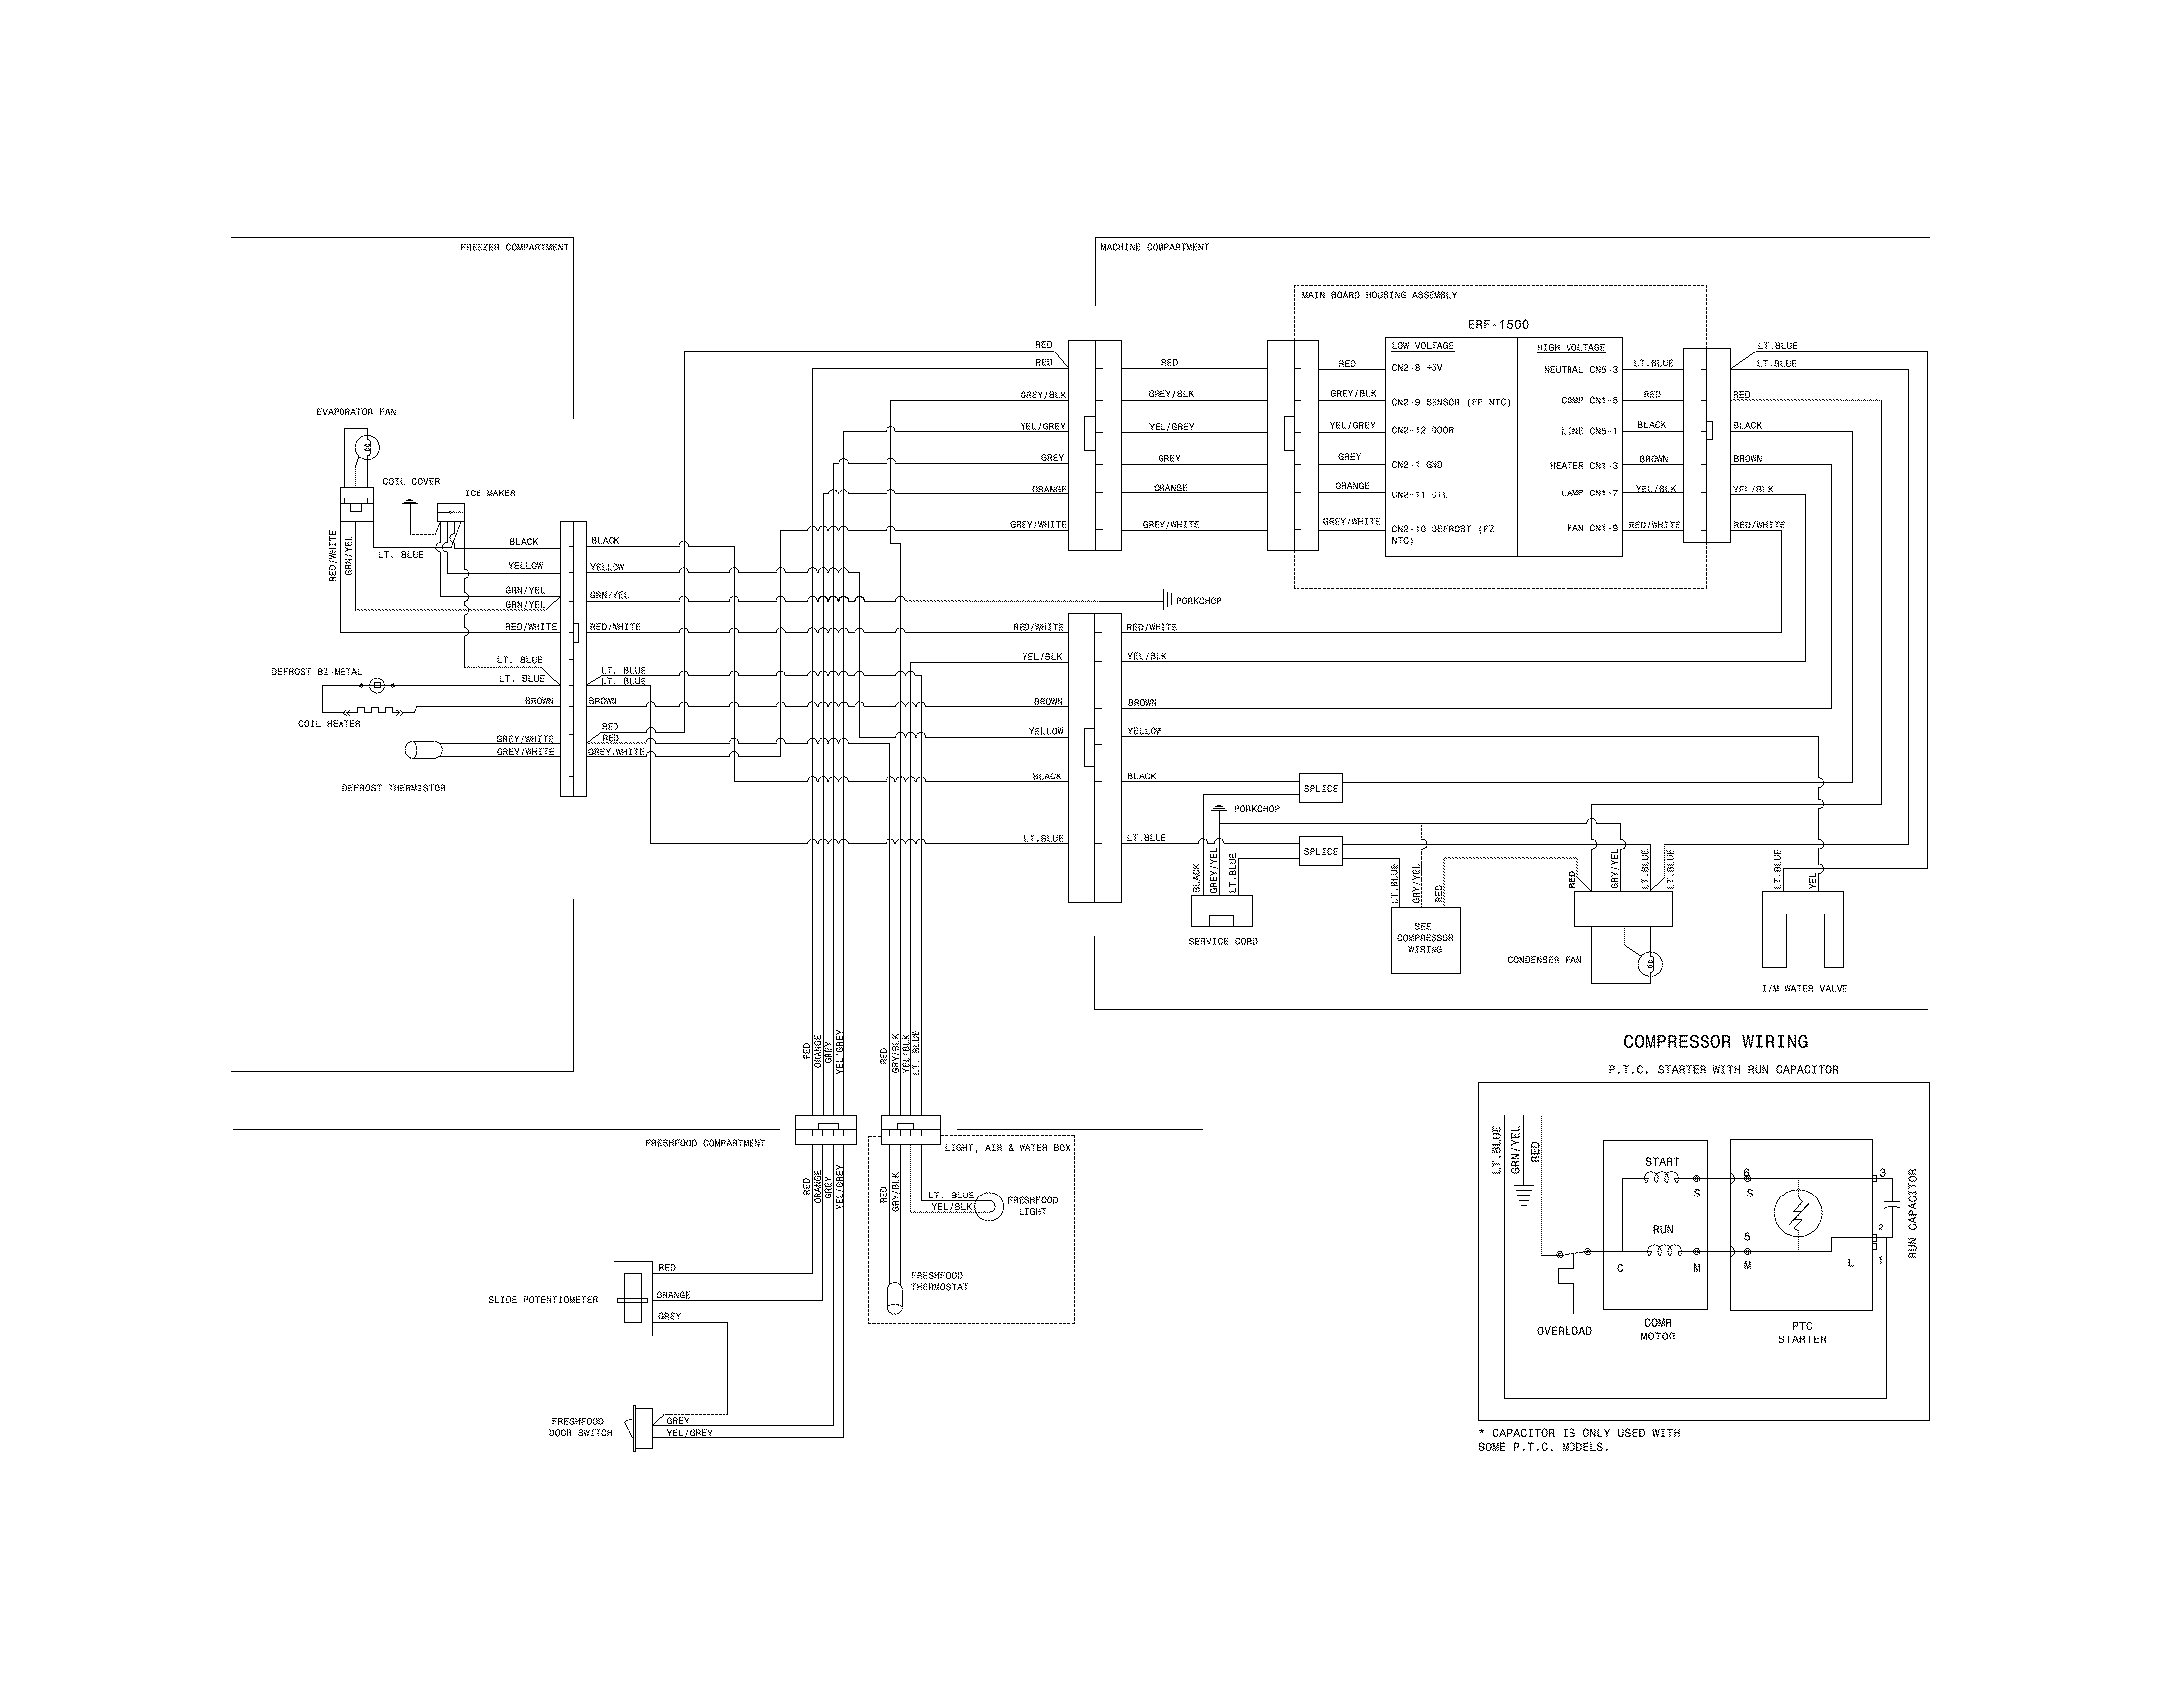 Wiring Diagram For Ice Maker from c.searspartsdirect.com